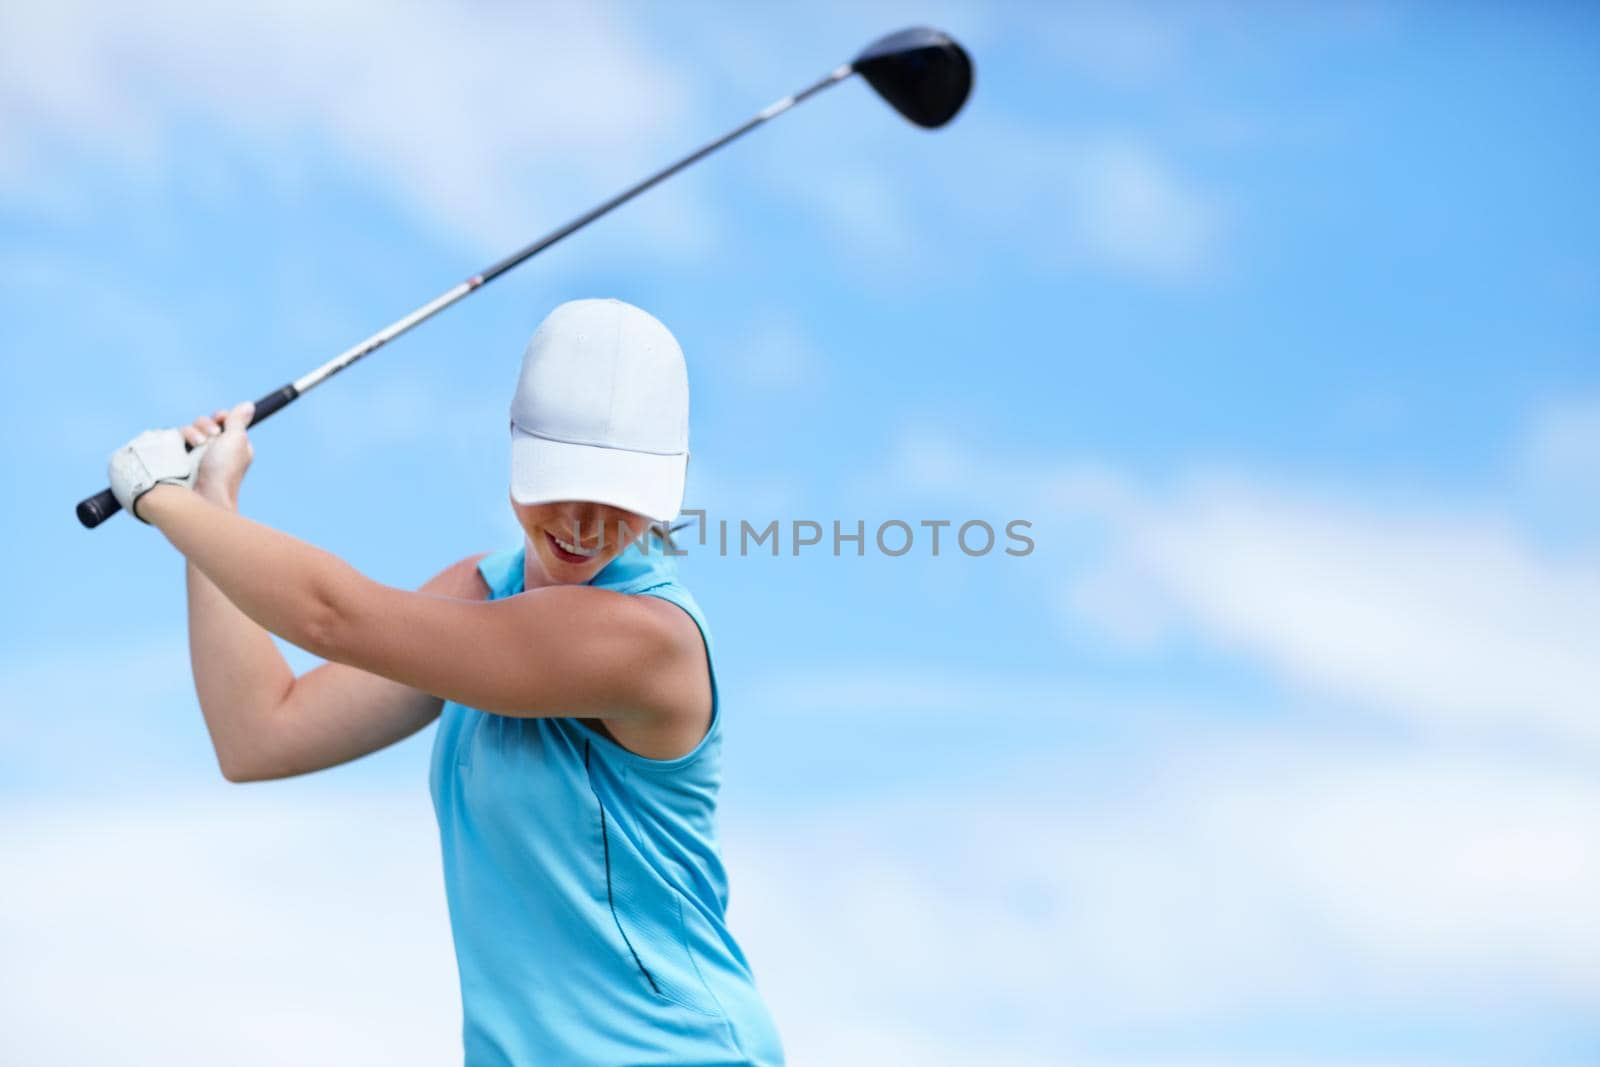 The trick is to keep your head down. A young female golfer swinging a golf club (driver) over her head about to take a shot - copyspace. by YuriArcurs